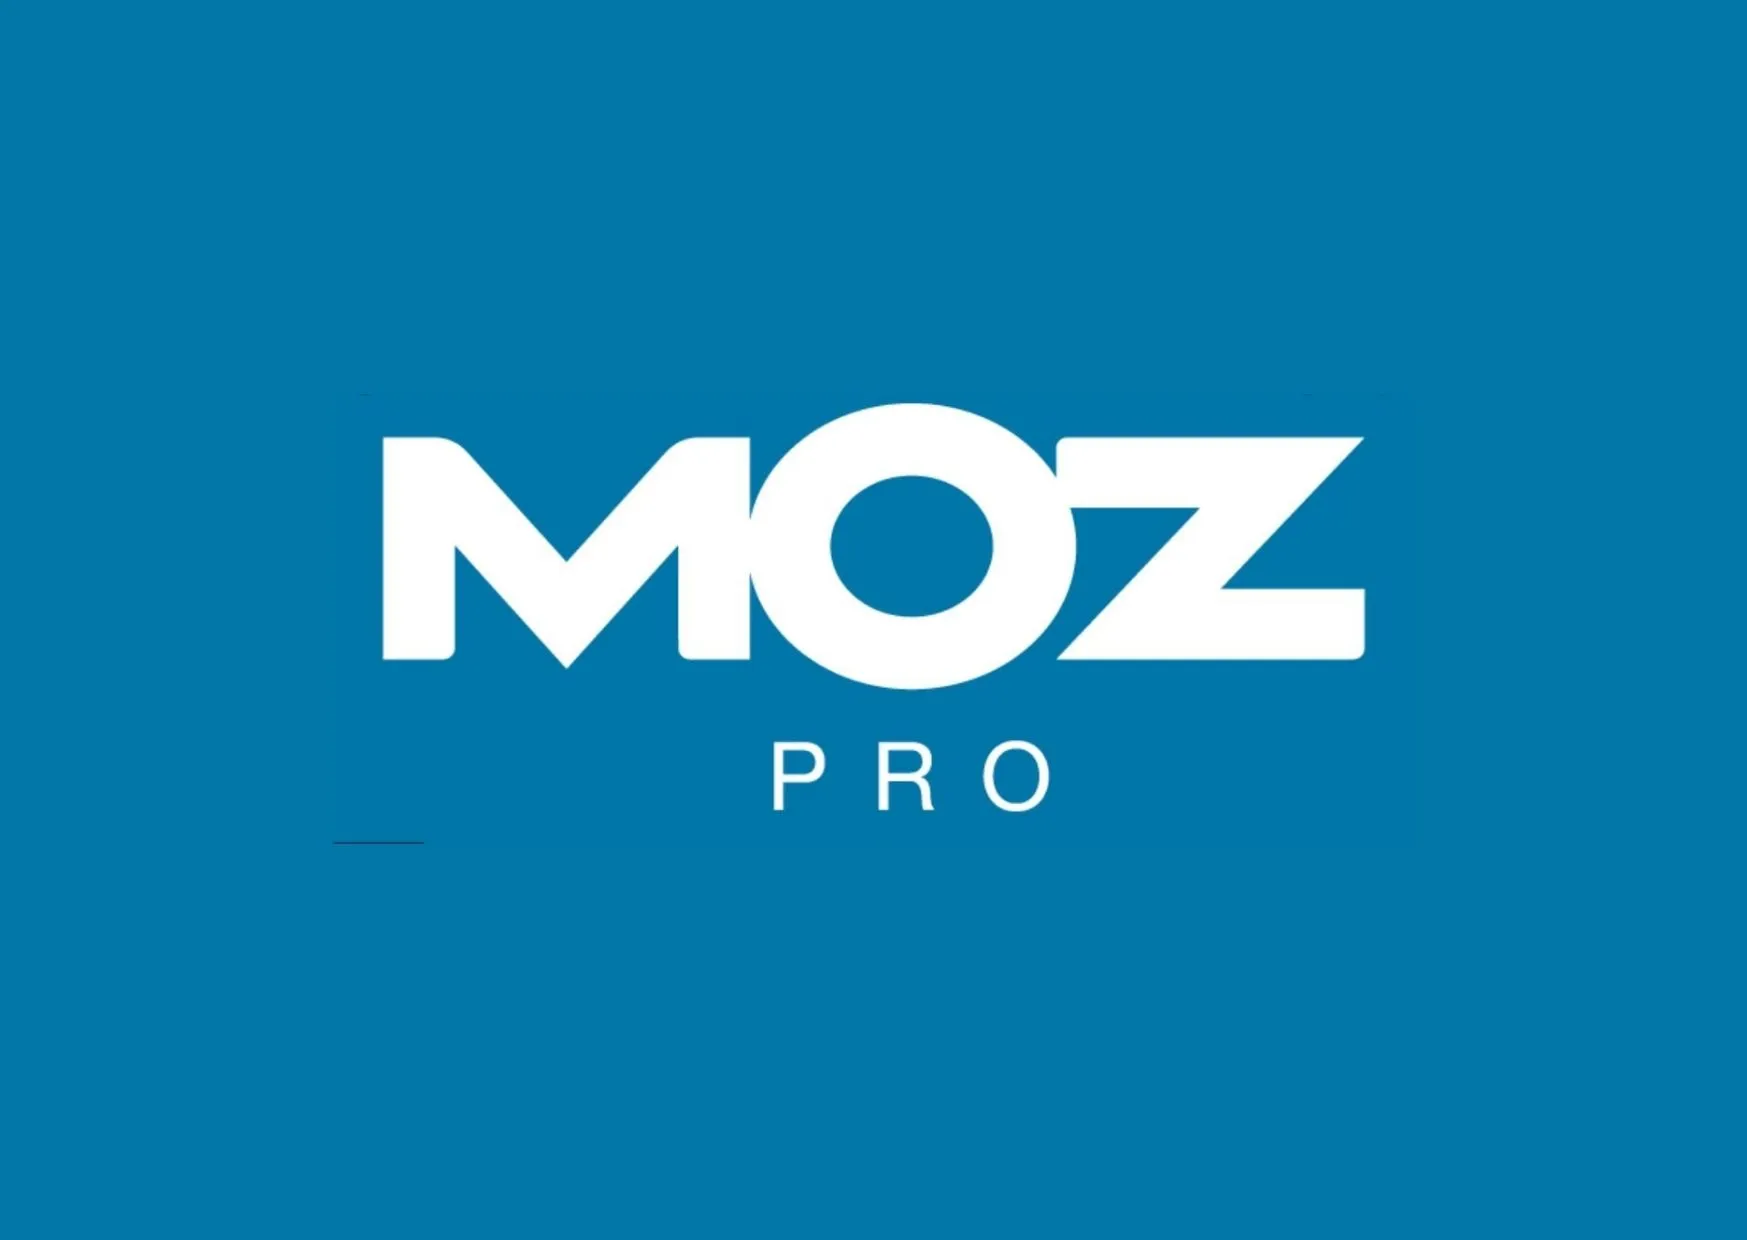 get moz pro for free. moz pro premium account for lifetime. get moz pro access for free.